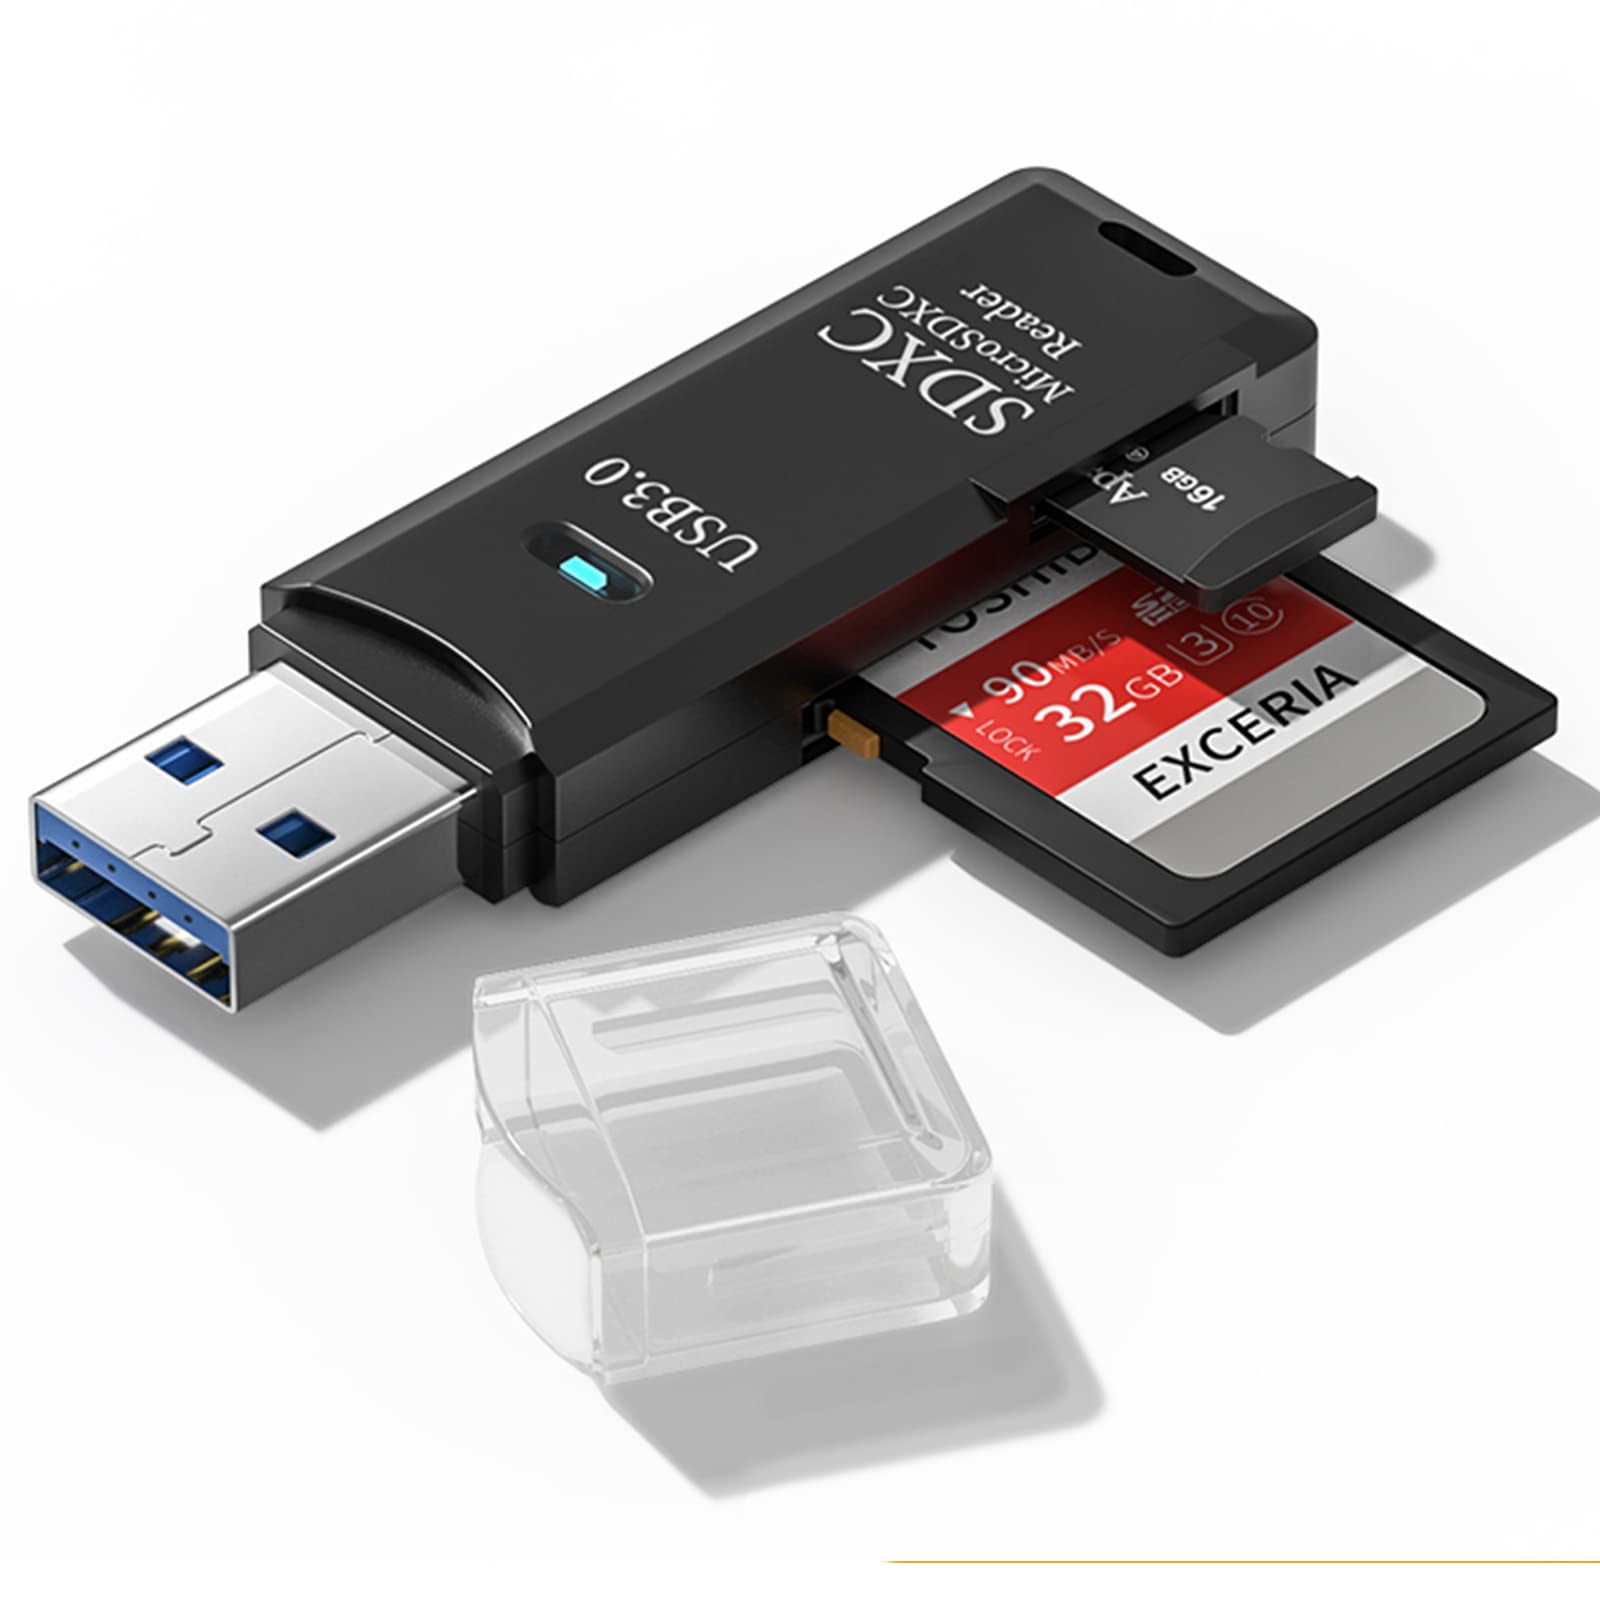 Insert the SD card into another computer or device to check if it is detected.
If the card is recognized on another device, the issue may be with the original computer's card reader or drivers.